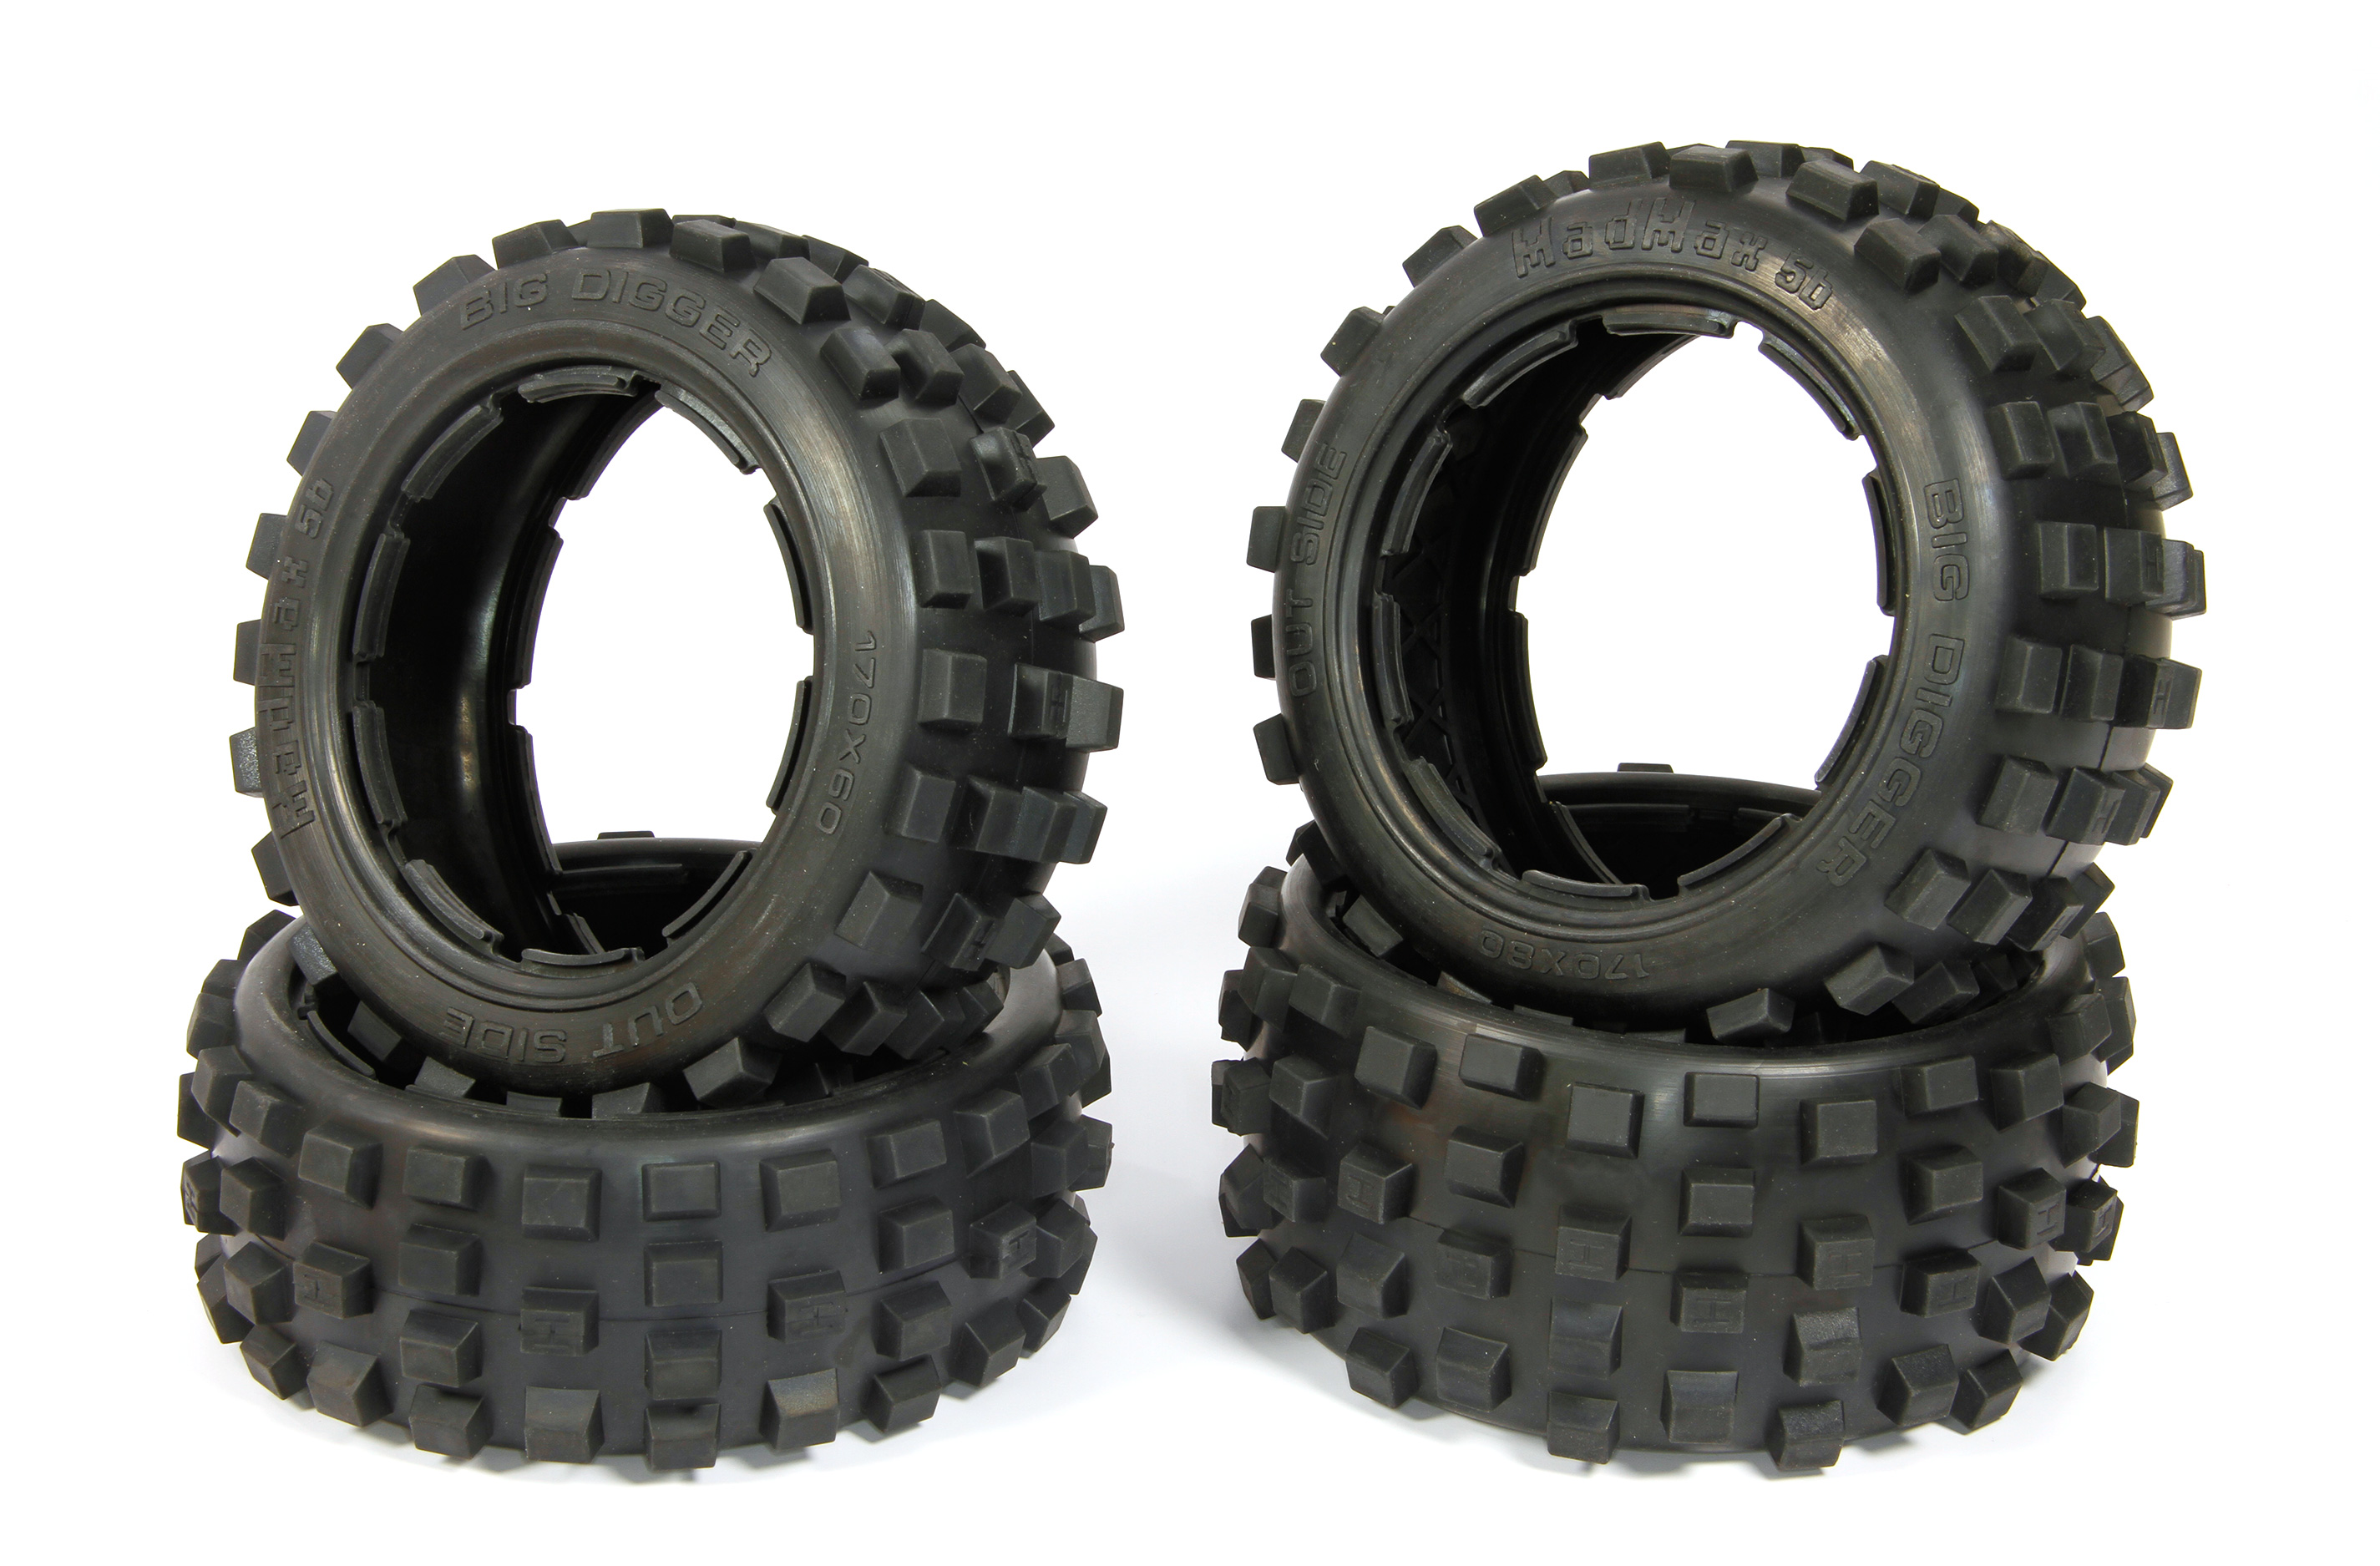 y1411 MadMax BIG DIGGER one pair front and one pair rear